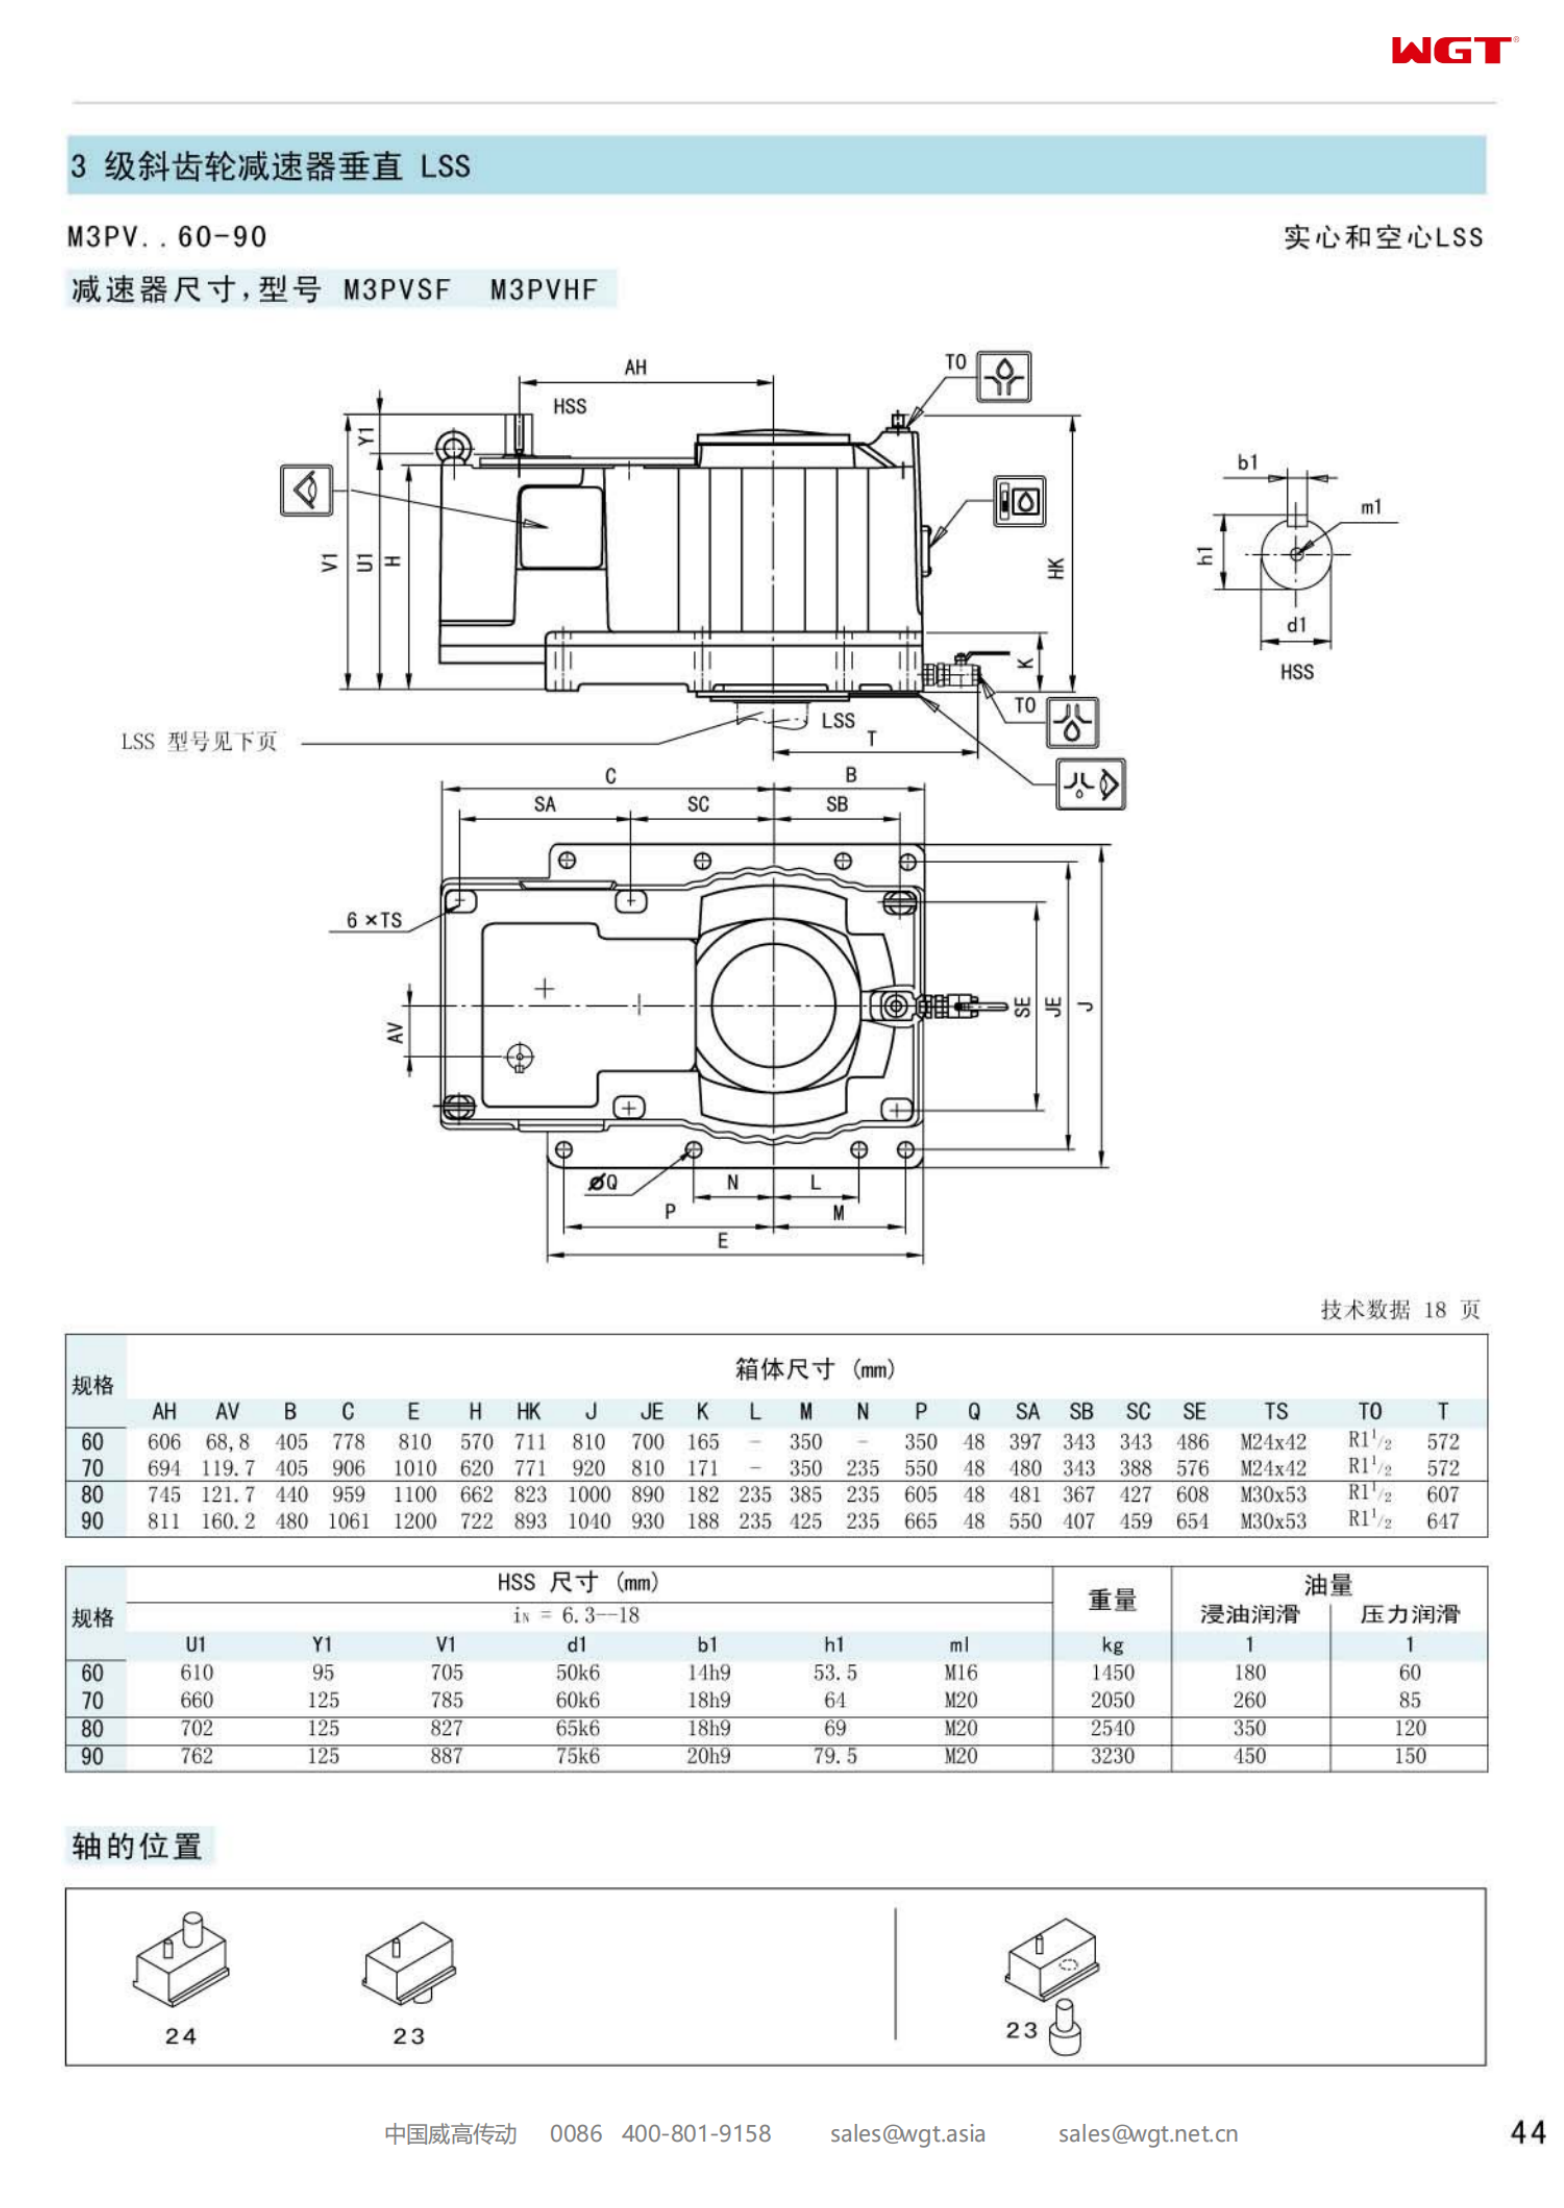 M3PVSF70 Replace_SEW_M_Series Gearbox